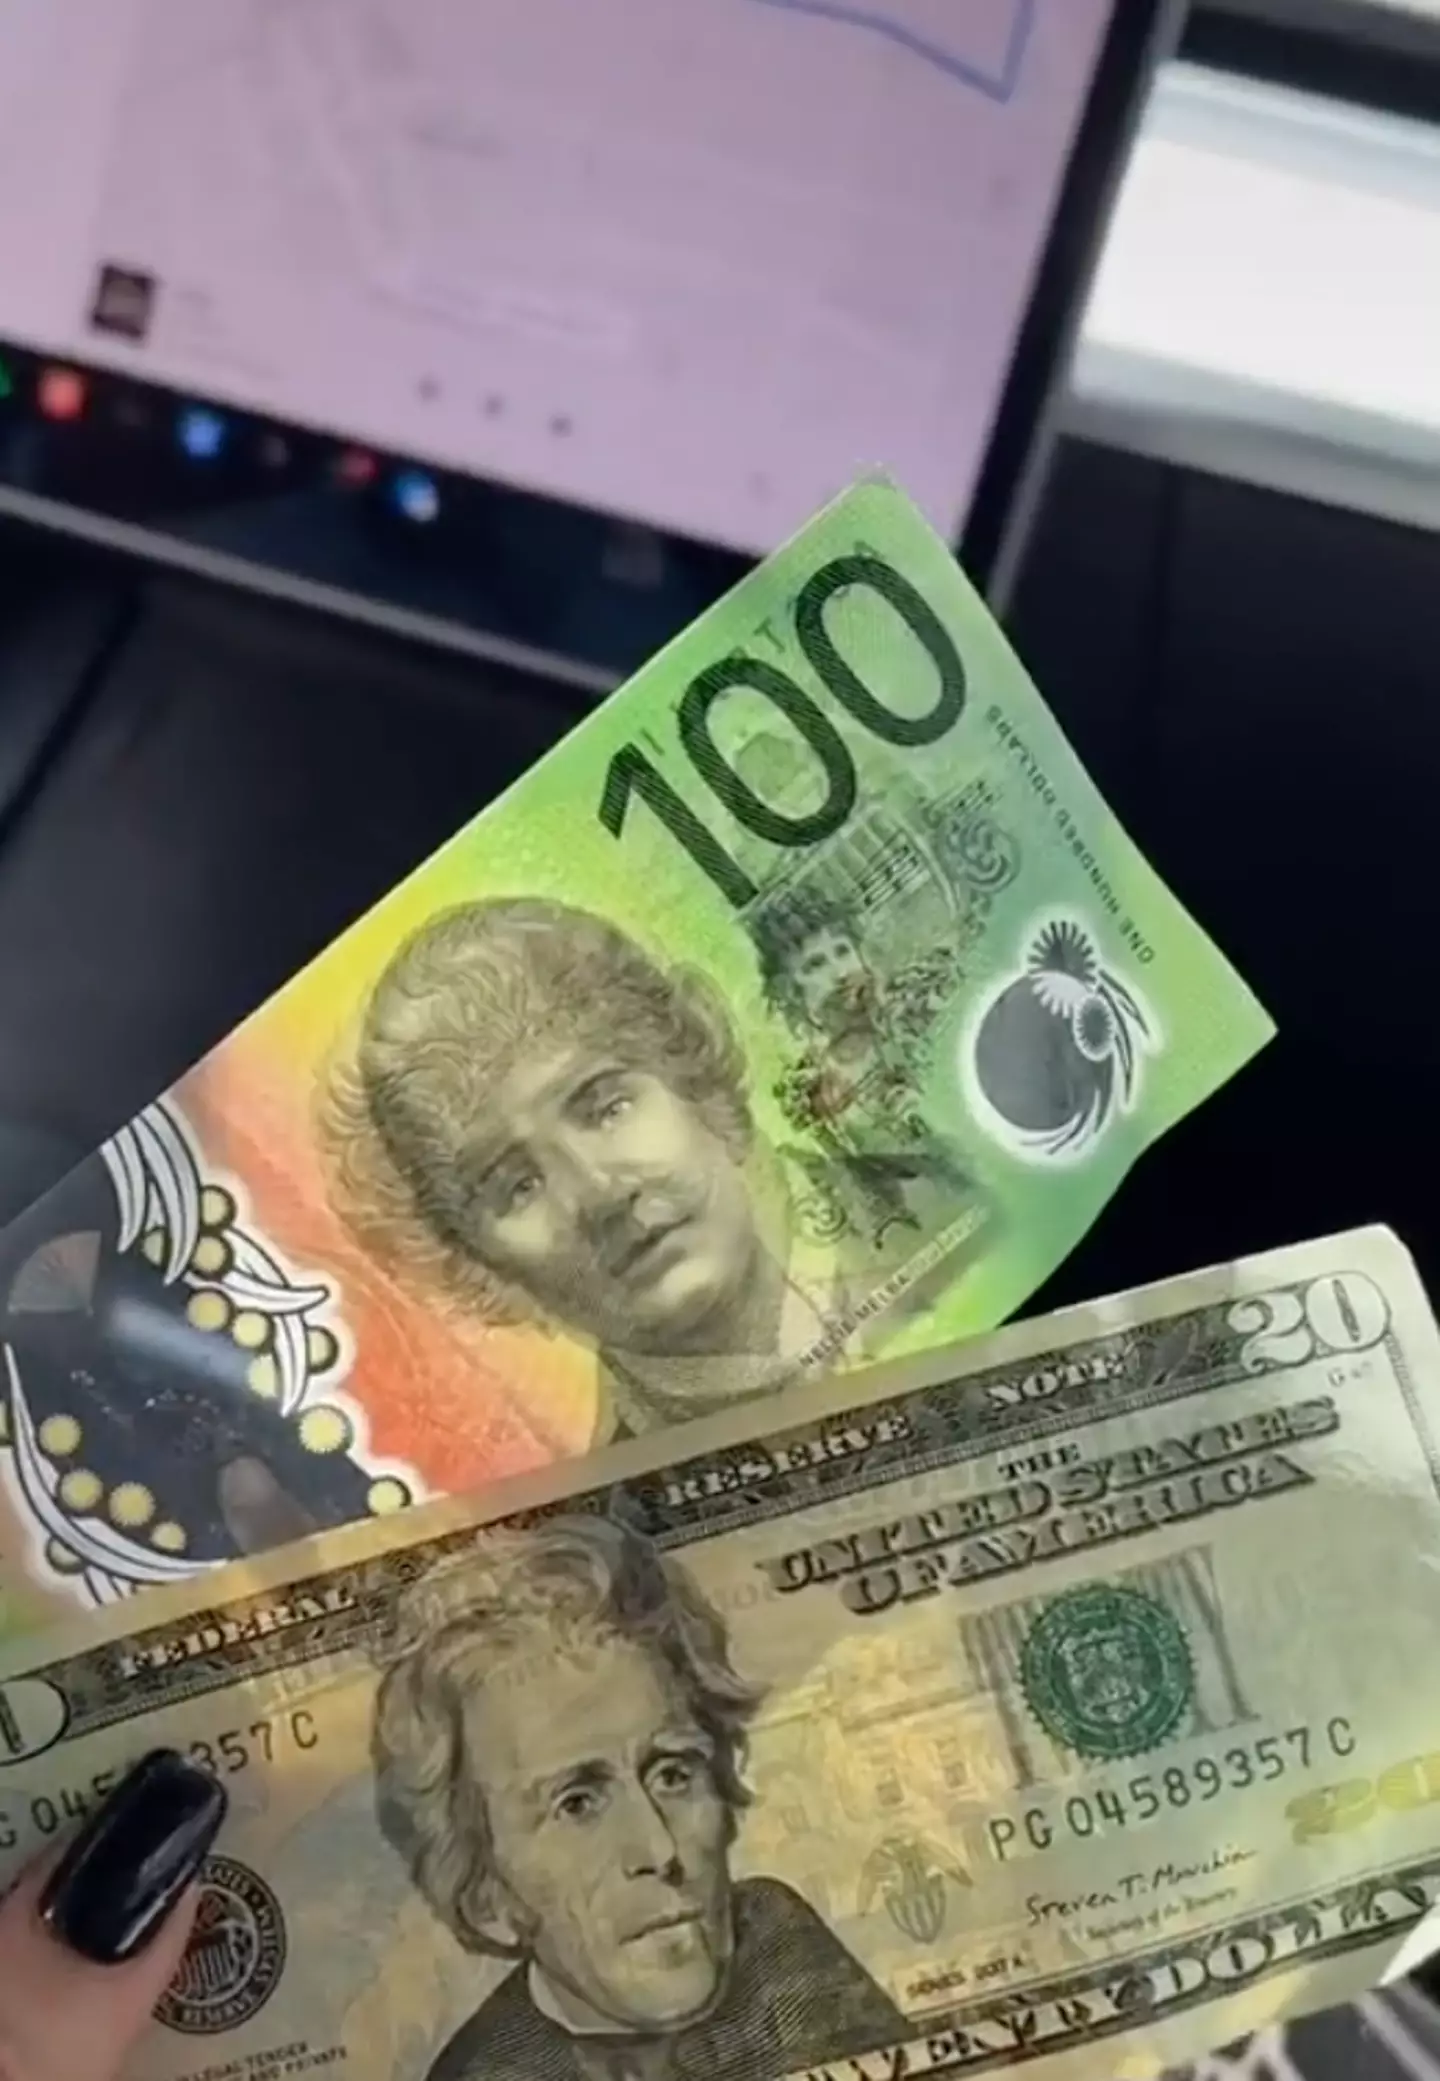 Testa also asked followers what note they prefer out of Australian and American, flashing two 100 dollar bills.